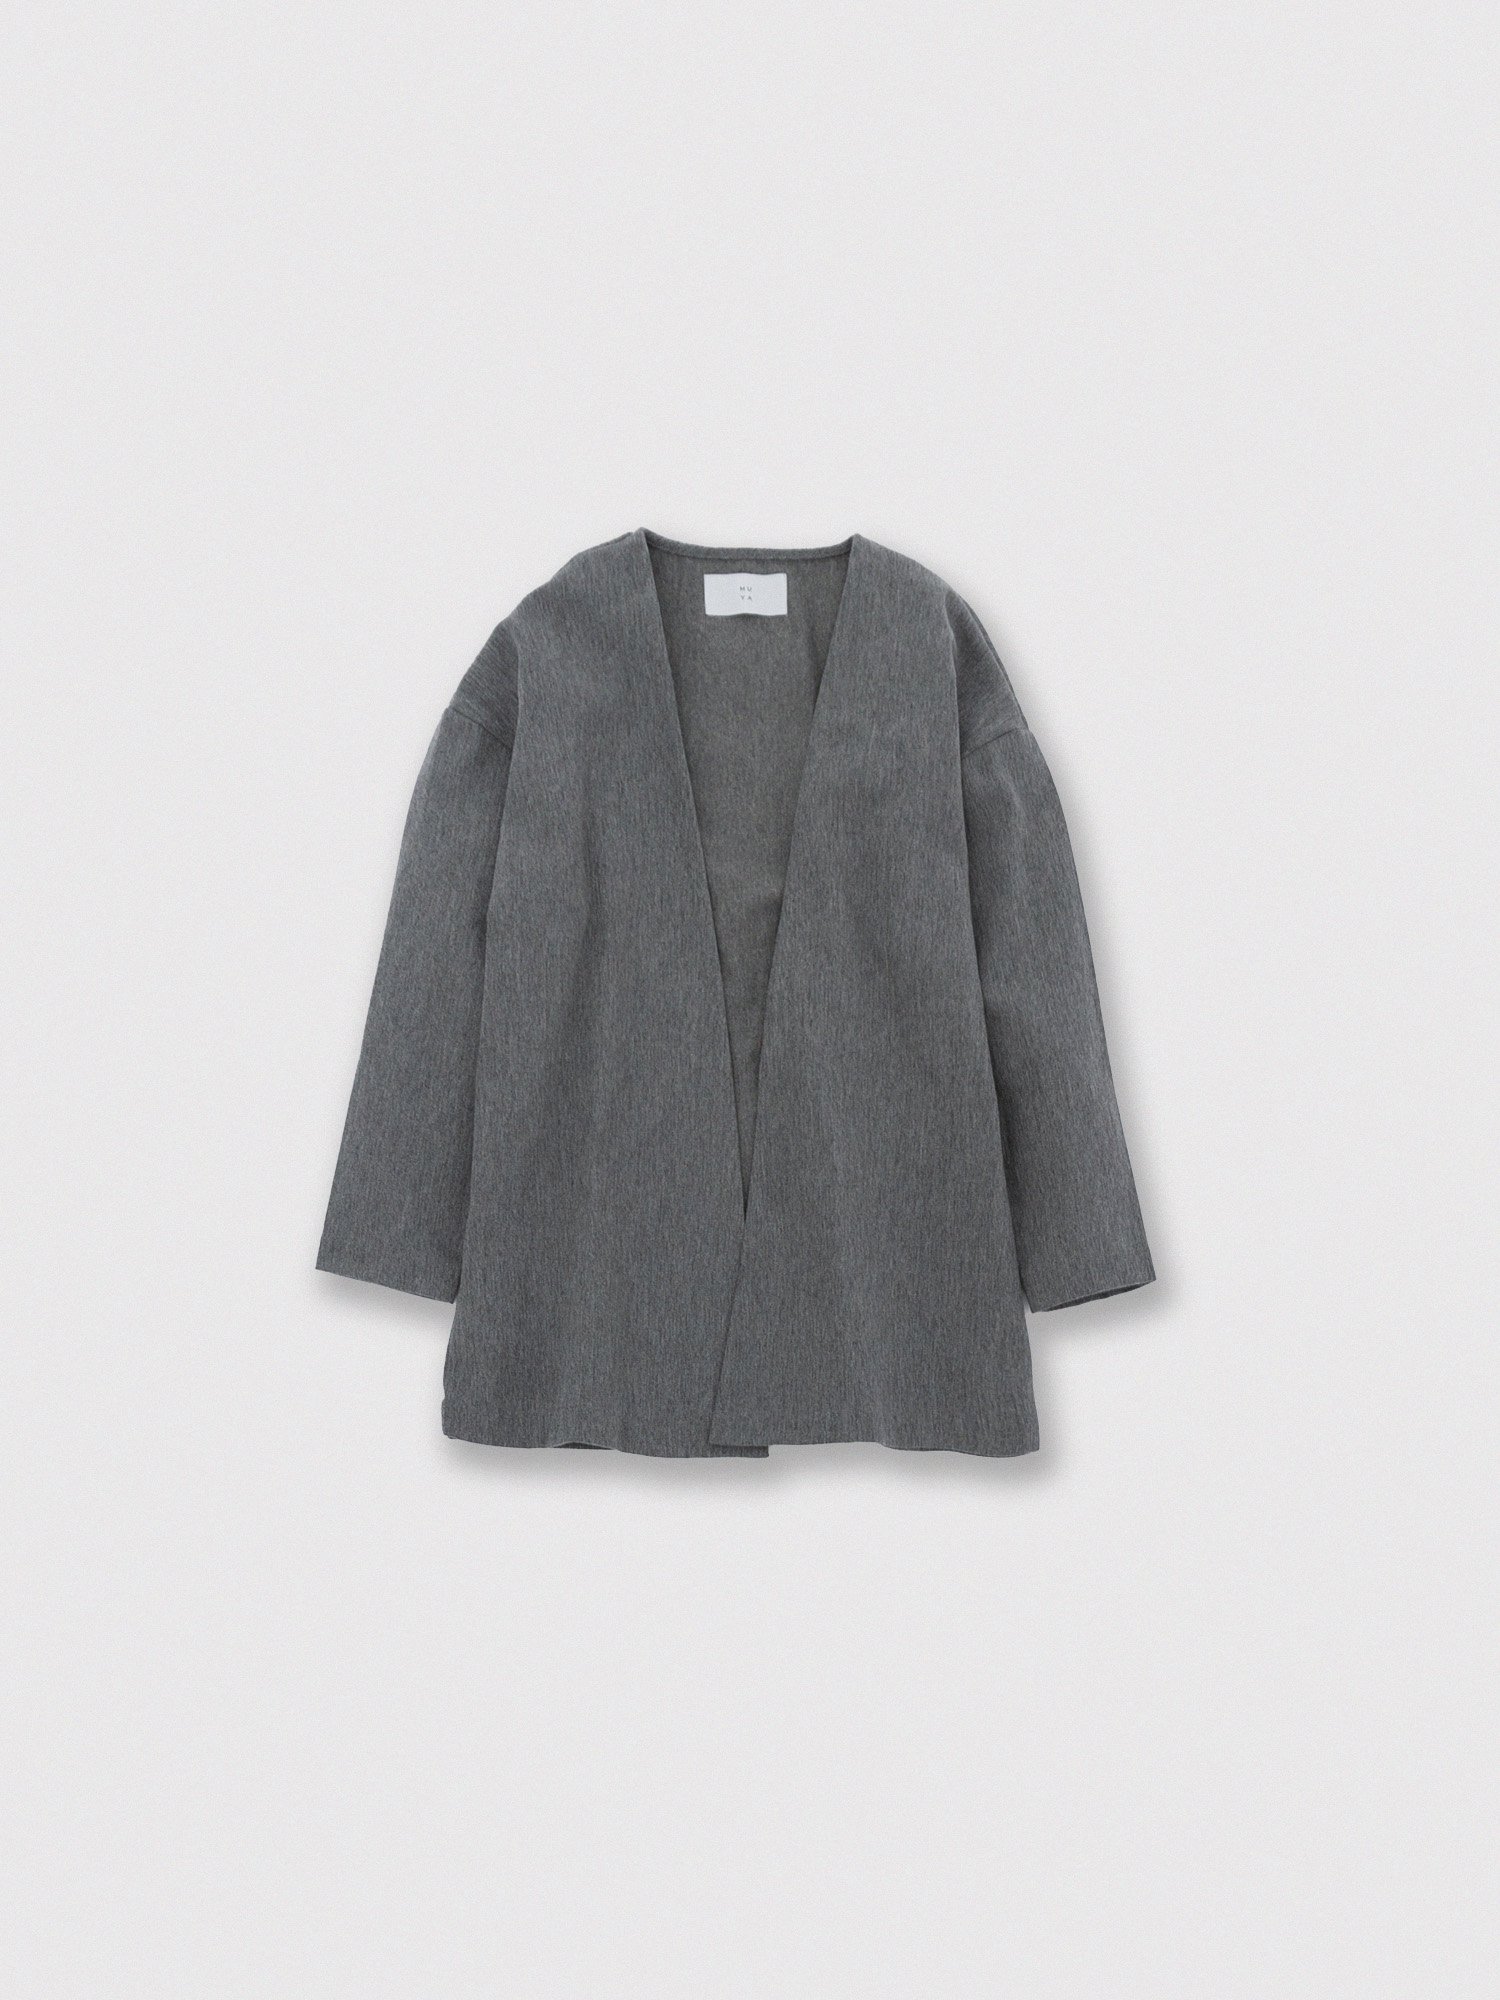 Relax Cardigan<br /> /2color